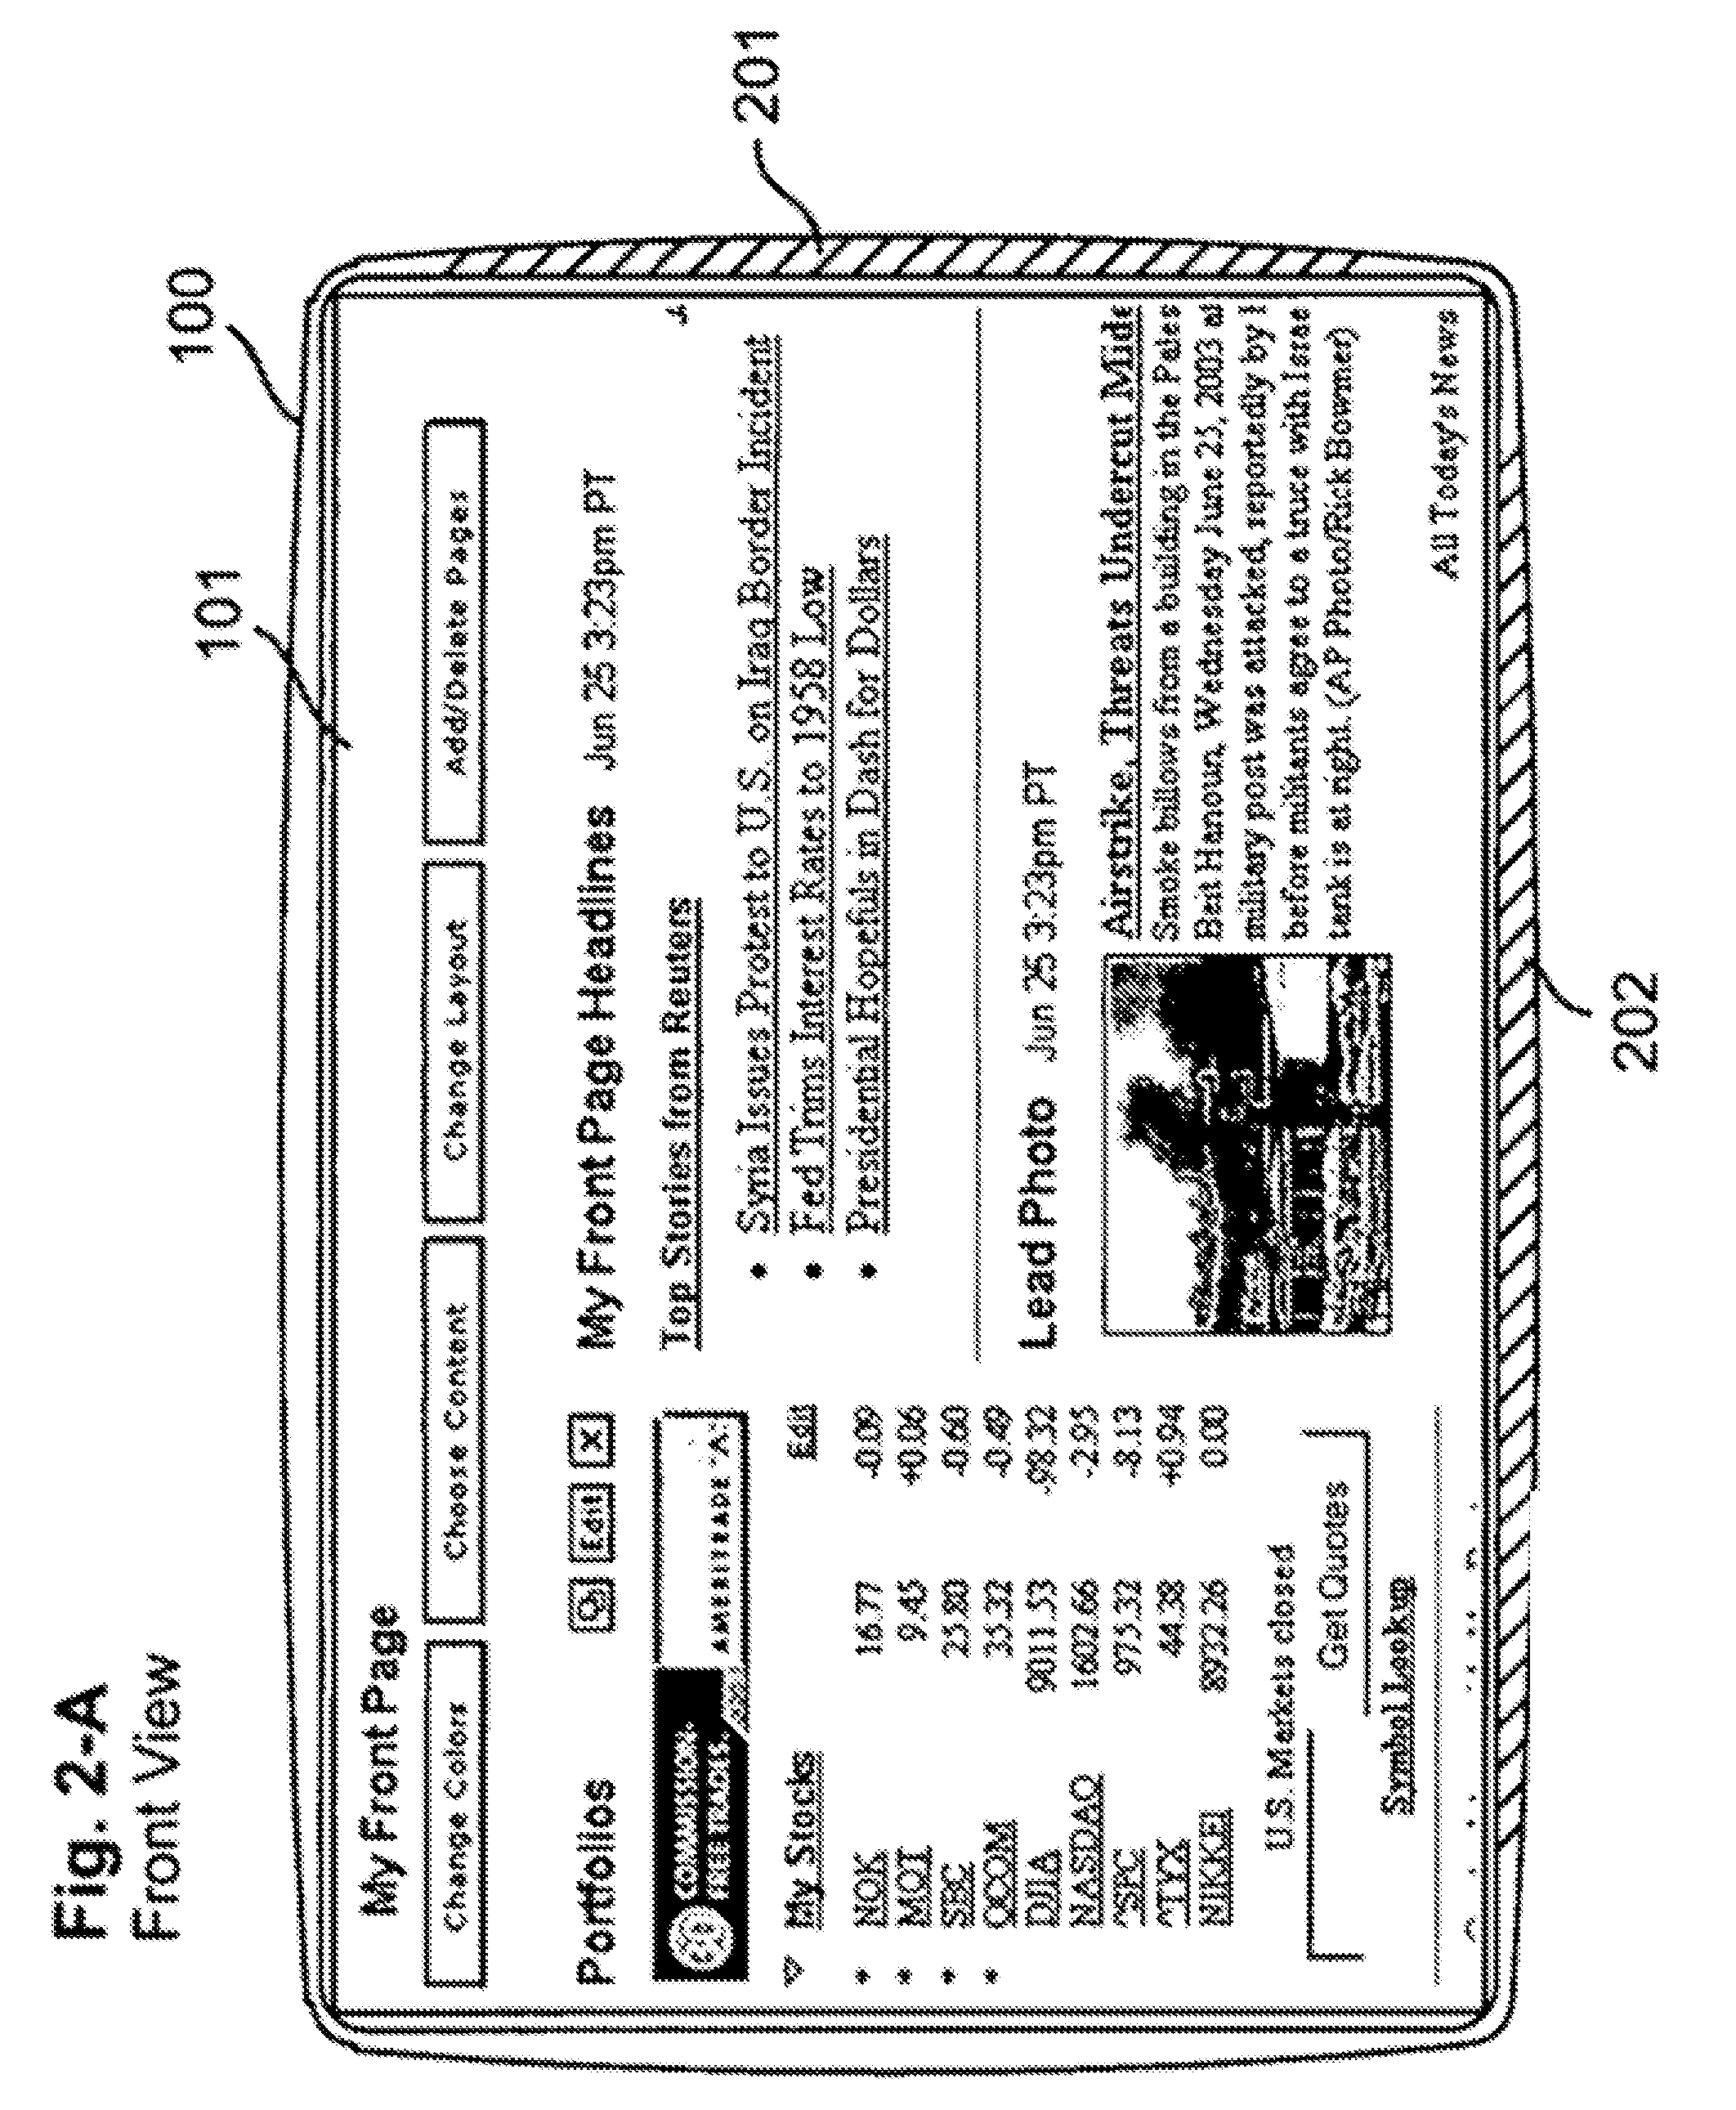 Multimedia client interface devices and methods